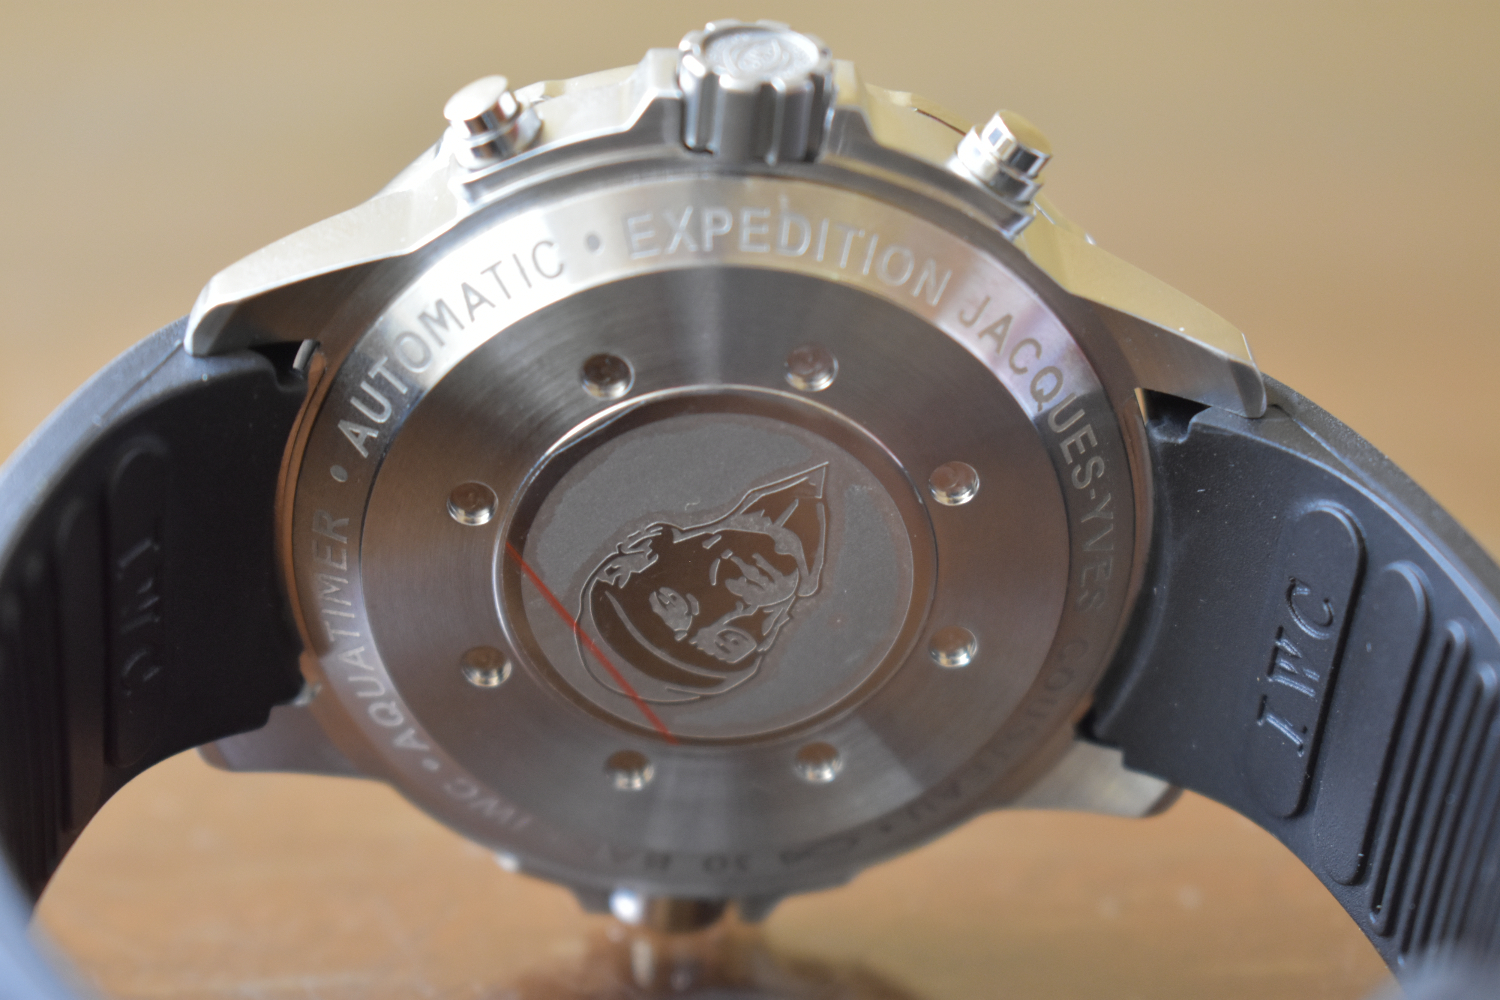 I W C AQUA TIMER EDITION EXPEDITION JACQUES-YVES COUSTEAU CHRONOGRAPH WATCH FOR SALE IN NAIROBI,KENYA.